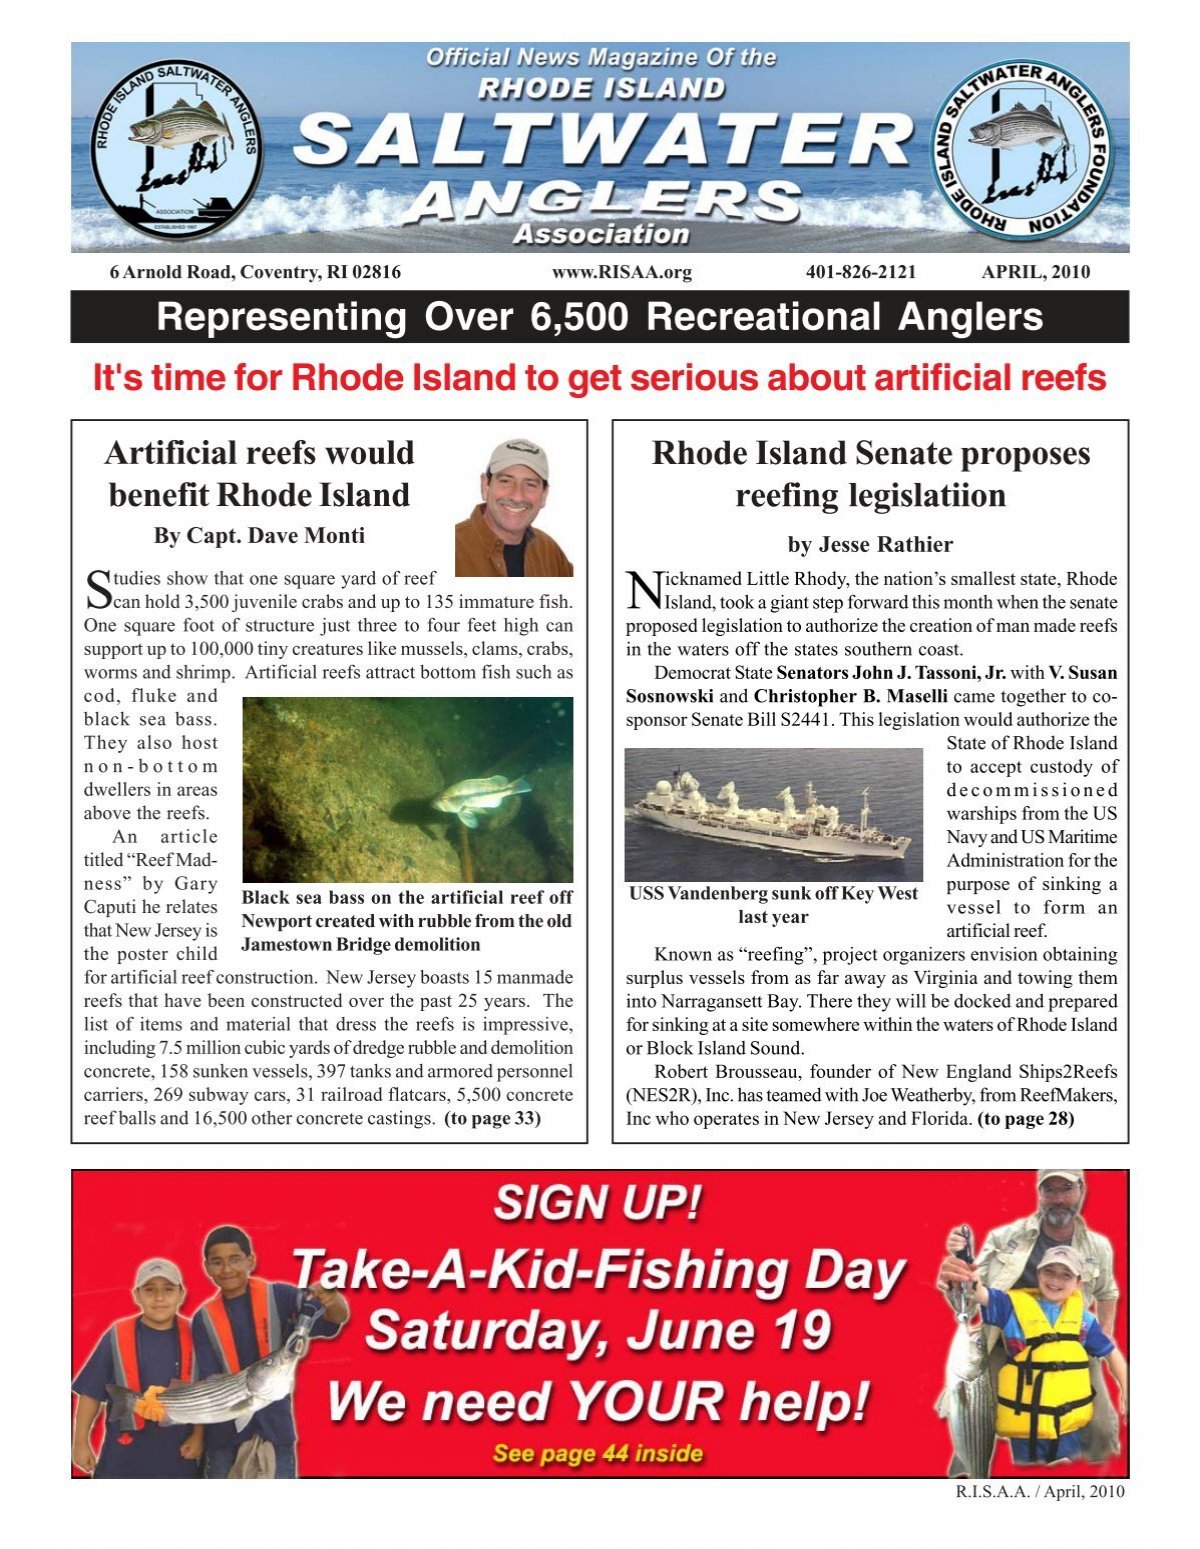 April, 2010 - The Rhode Island Saltwater Anglers Association